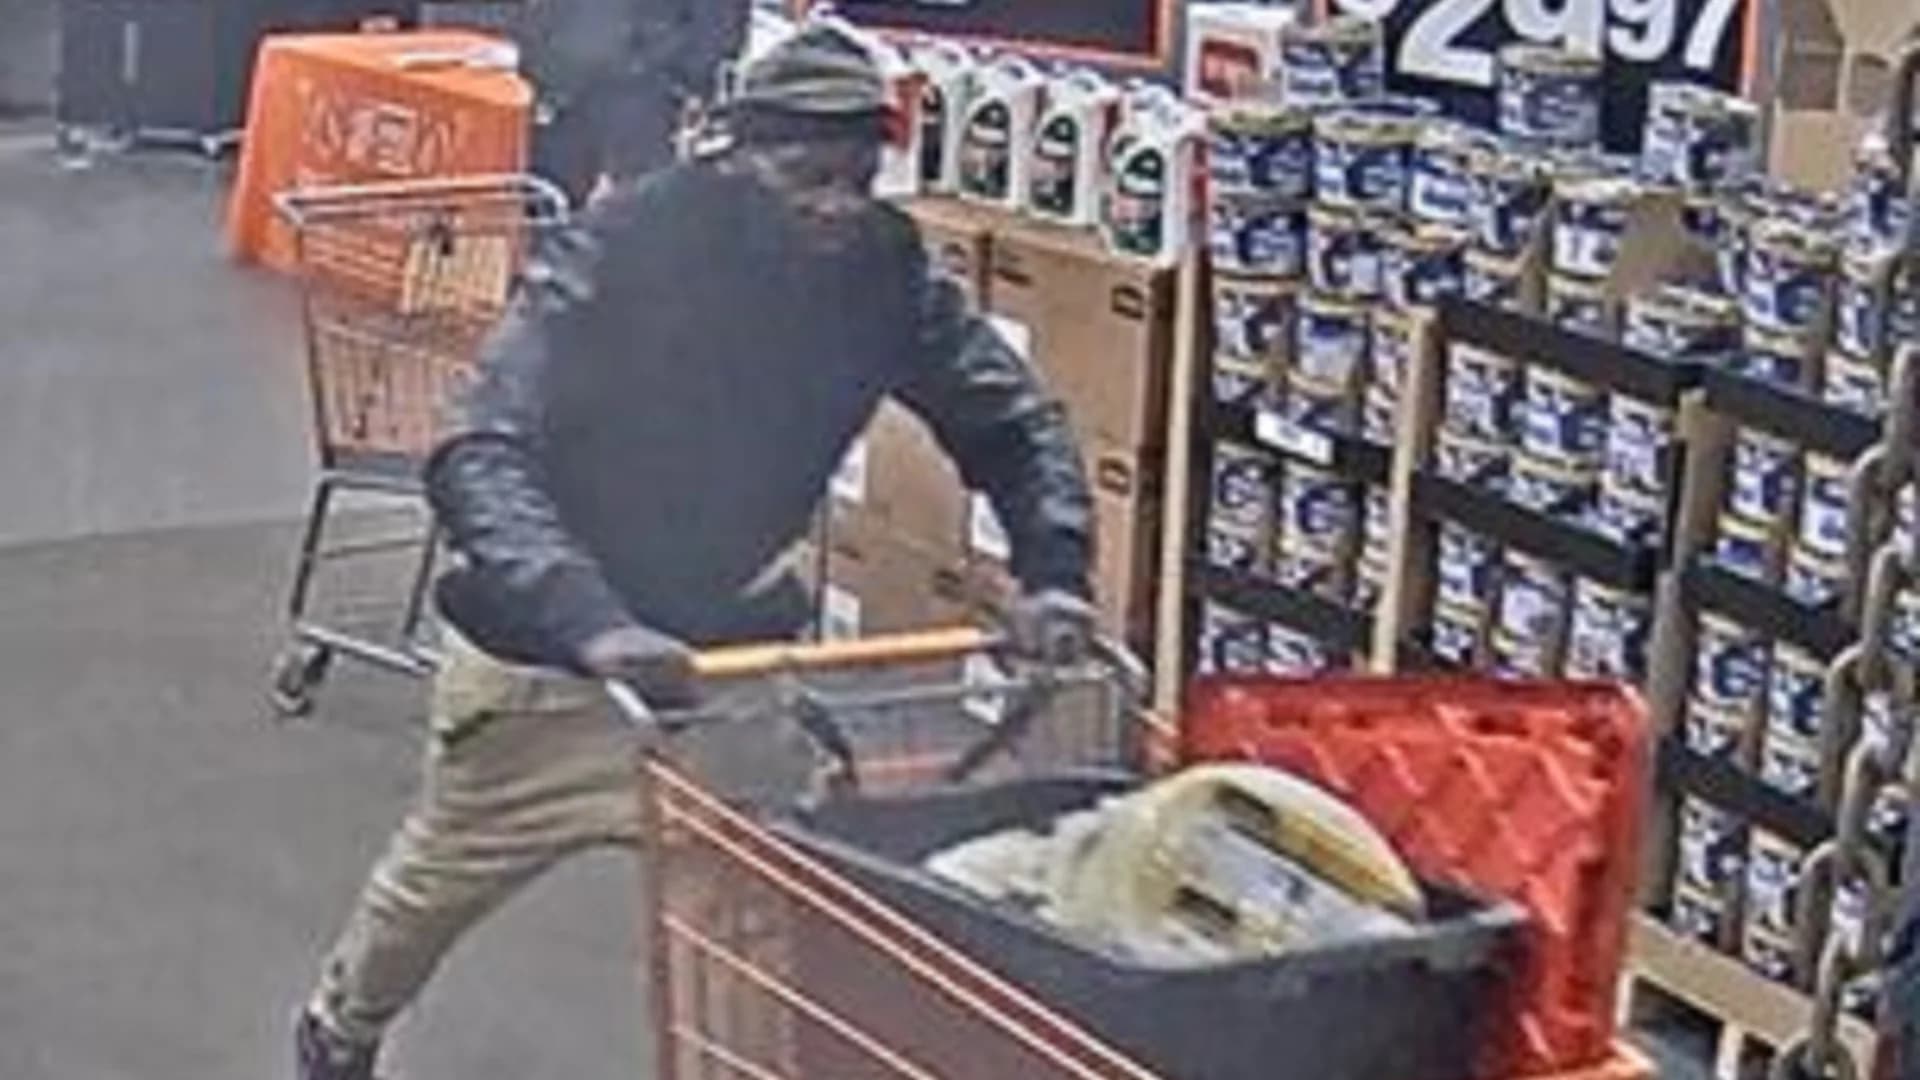 ALERT CENTER: Man sought for stealing over $1,000 in wire from Home Depot